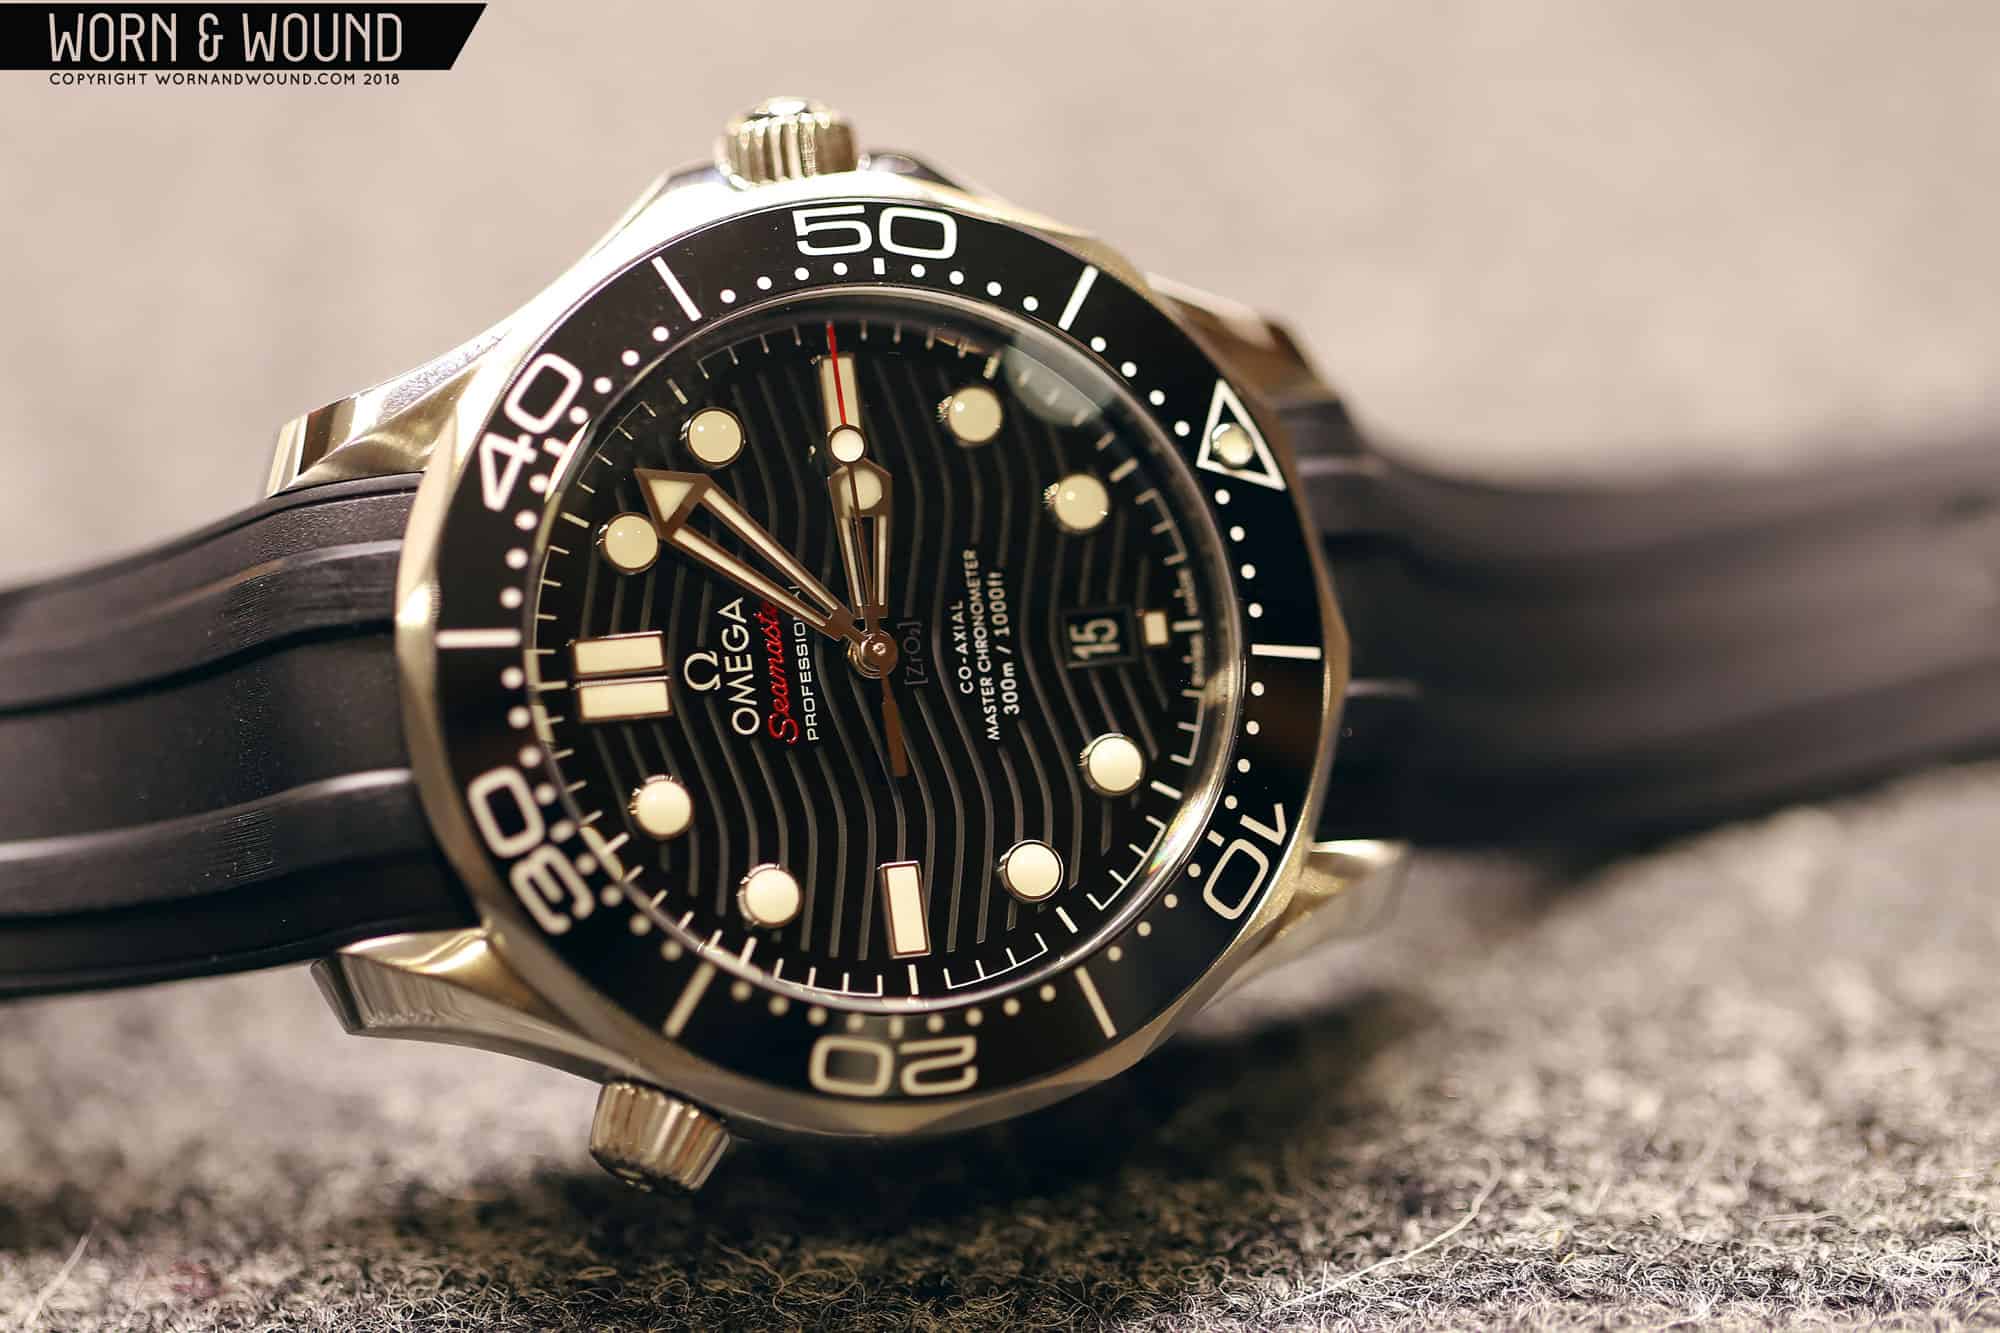 The 2018 Omega Seamaster 300M Co-Axial 